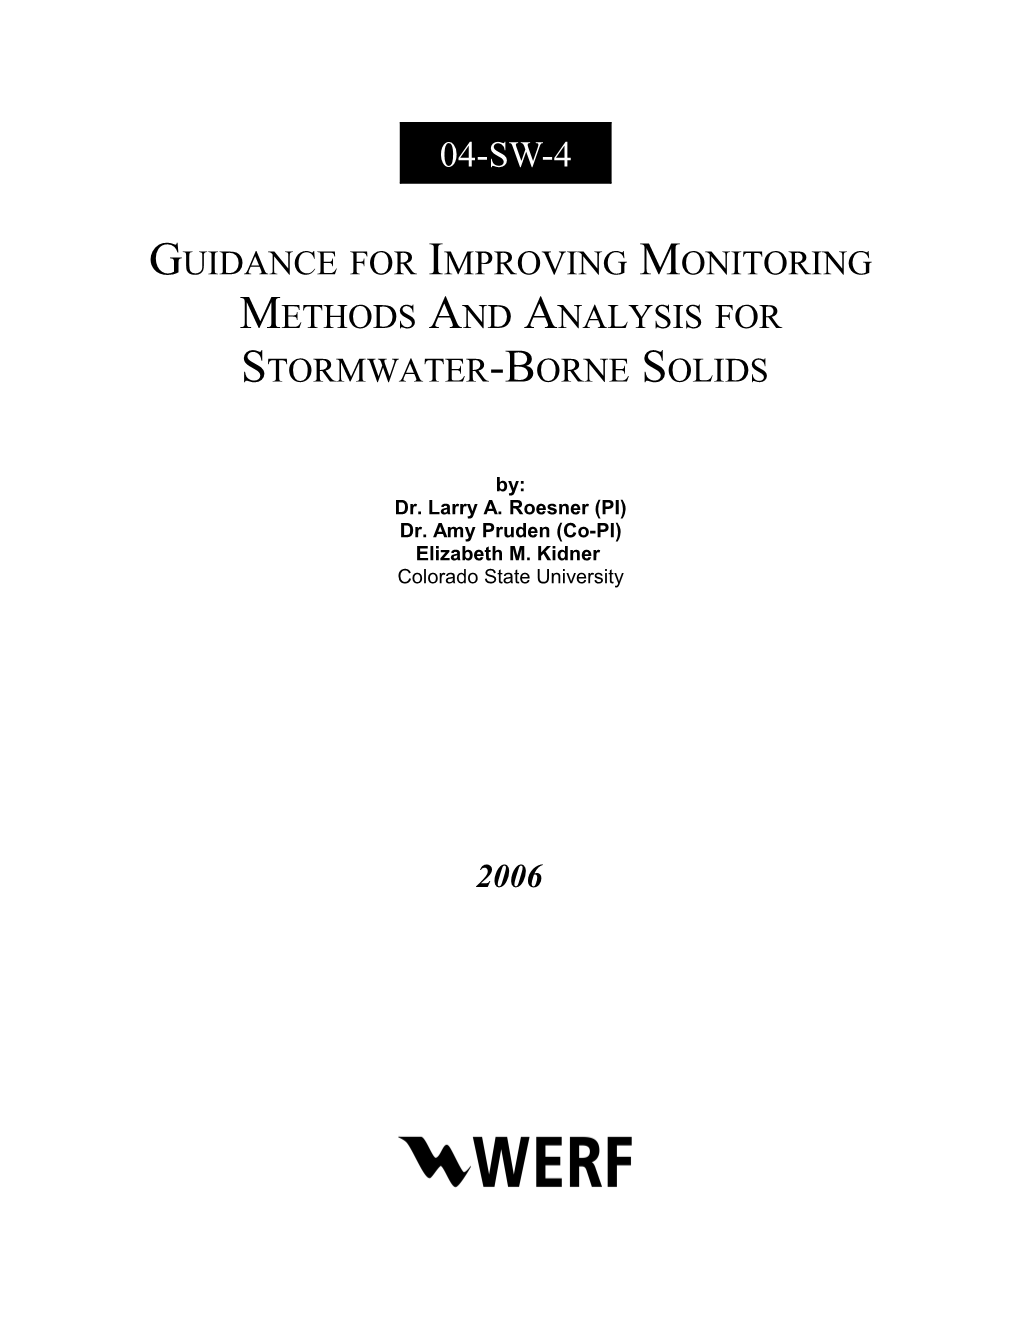 Guidance for Improving Monitoring Methods and Analysis for Stormwater-Borne Solids